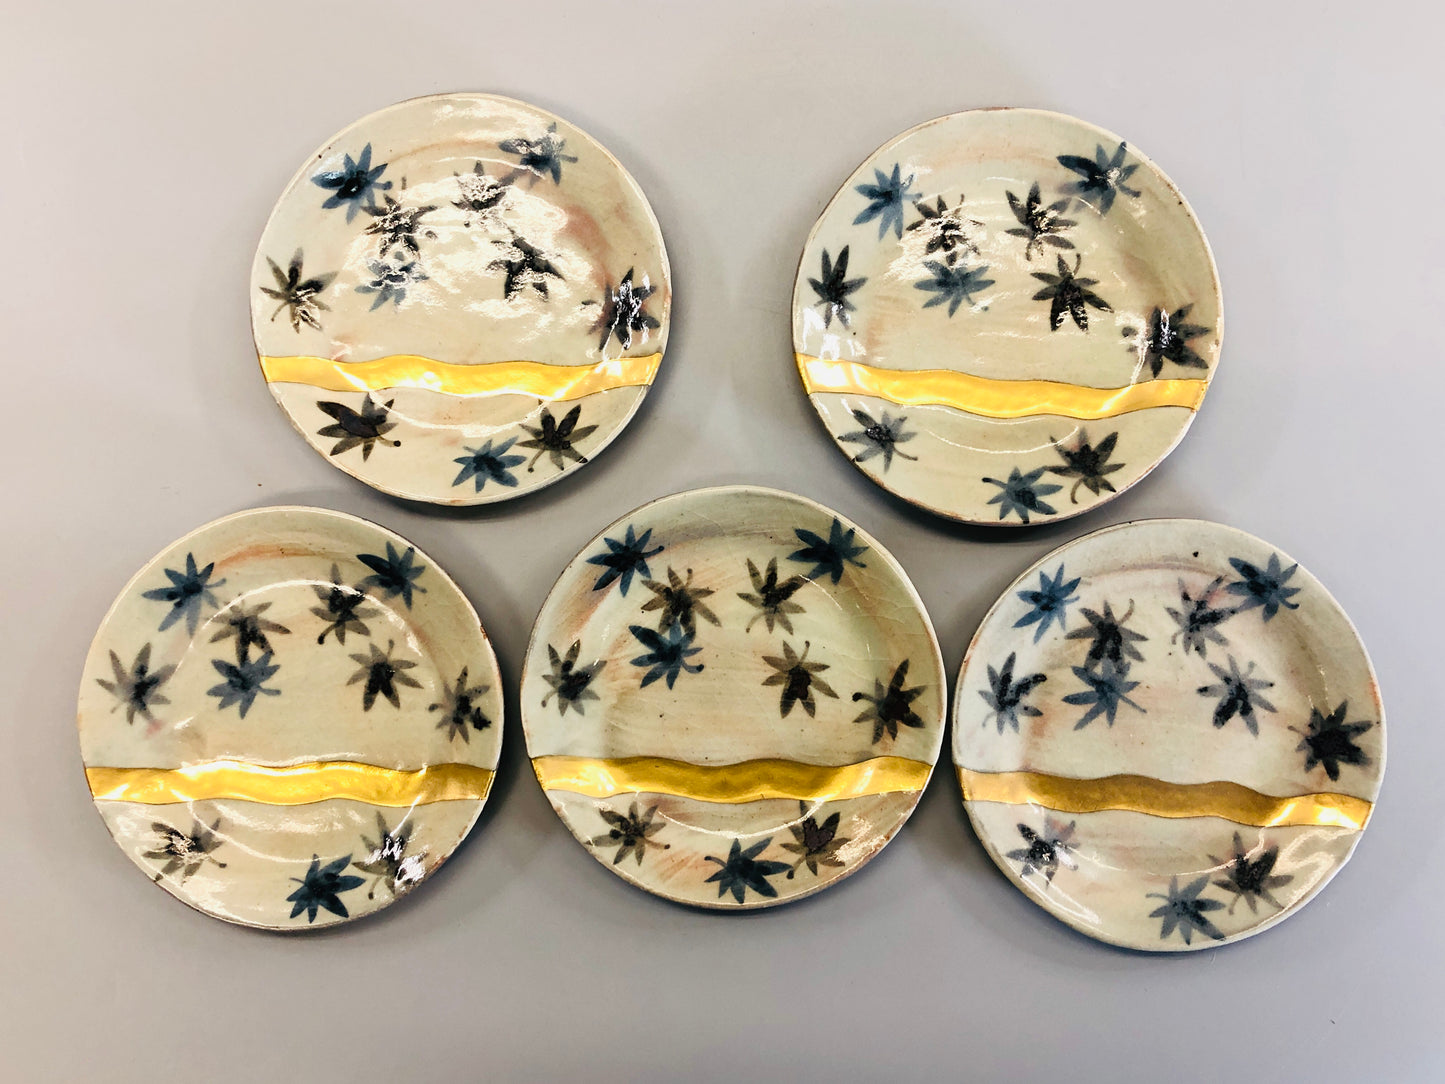 Y5327 DISH Mino-ware serving plate set of 5 signed box Japan antique tableware